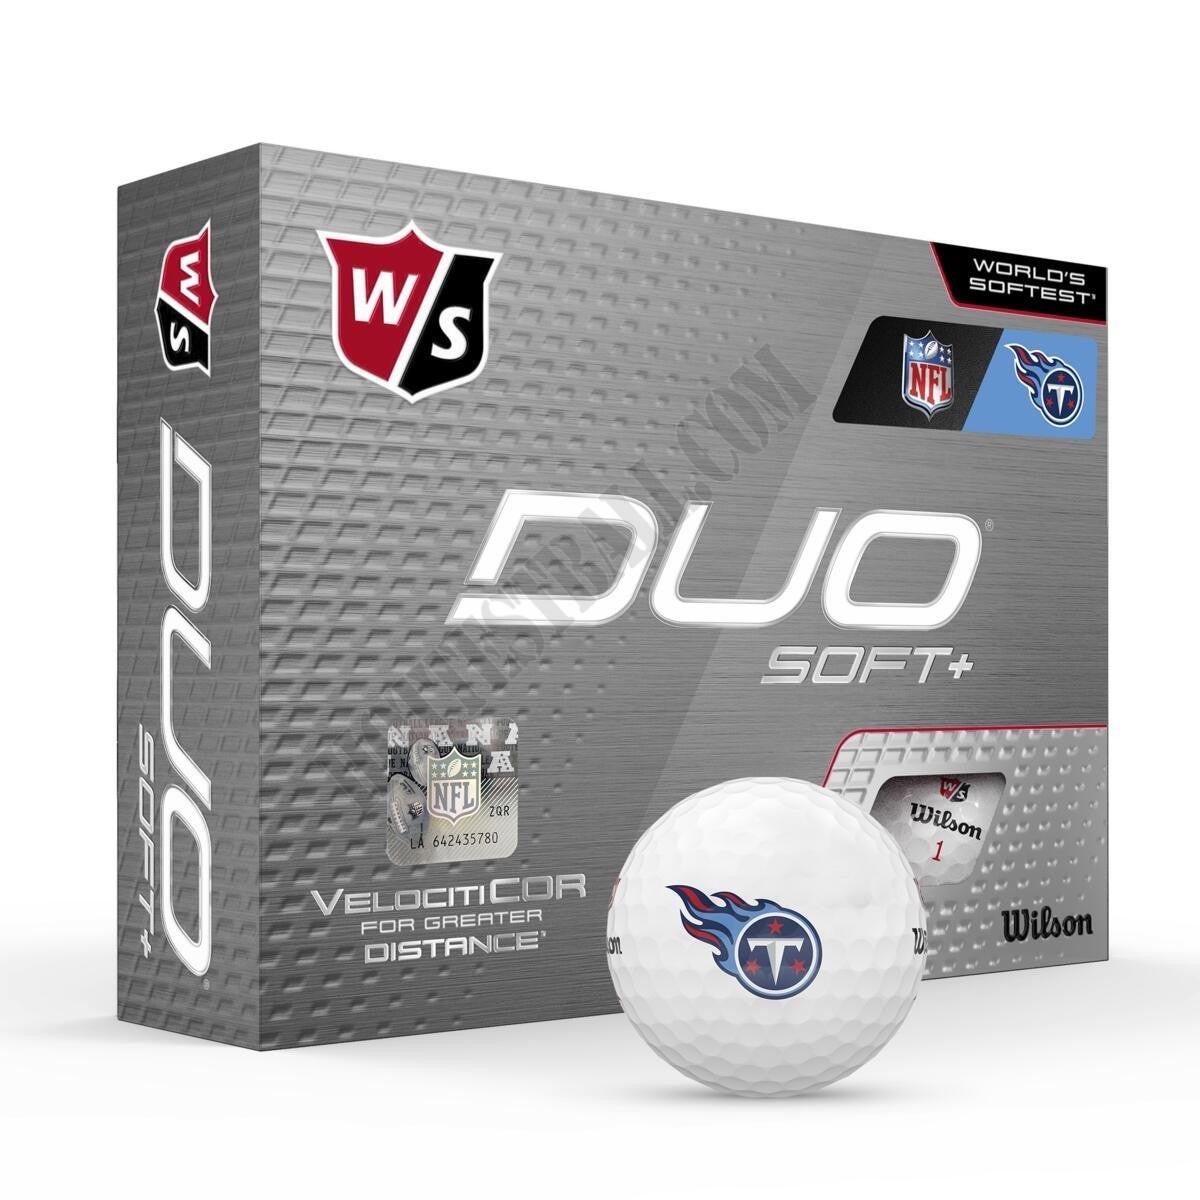 Duo Soft+ NFL Golf Balls - Tennessee Titans ● Wilson Promotions - Duo Soft+ NFL Golf Balls - Tennessee Titans ● Wilson Promotions